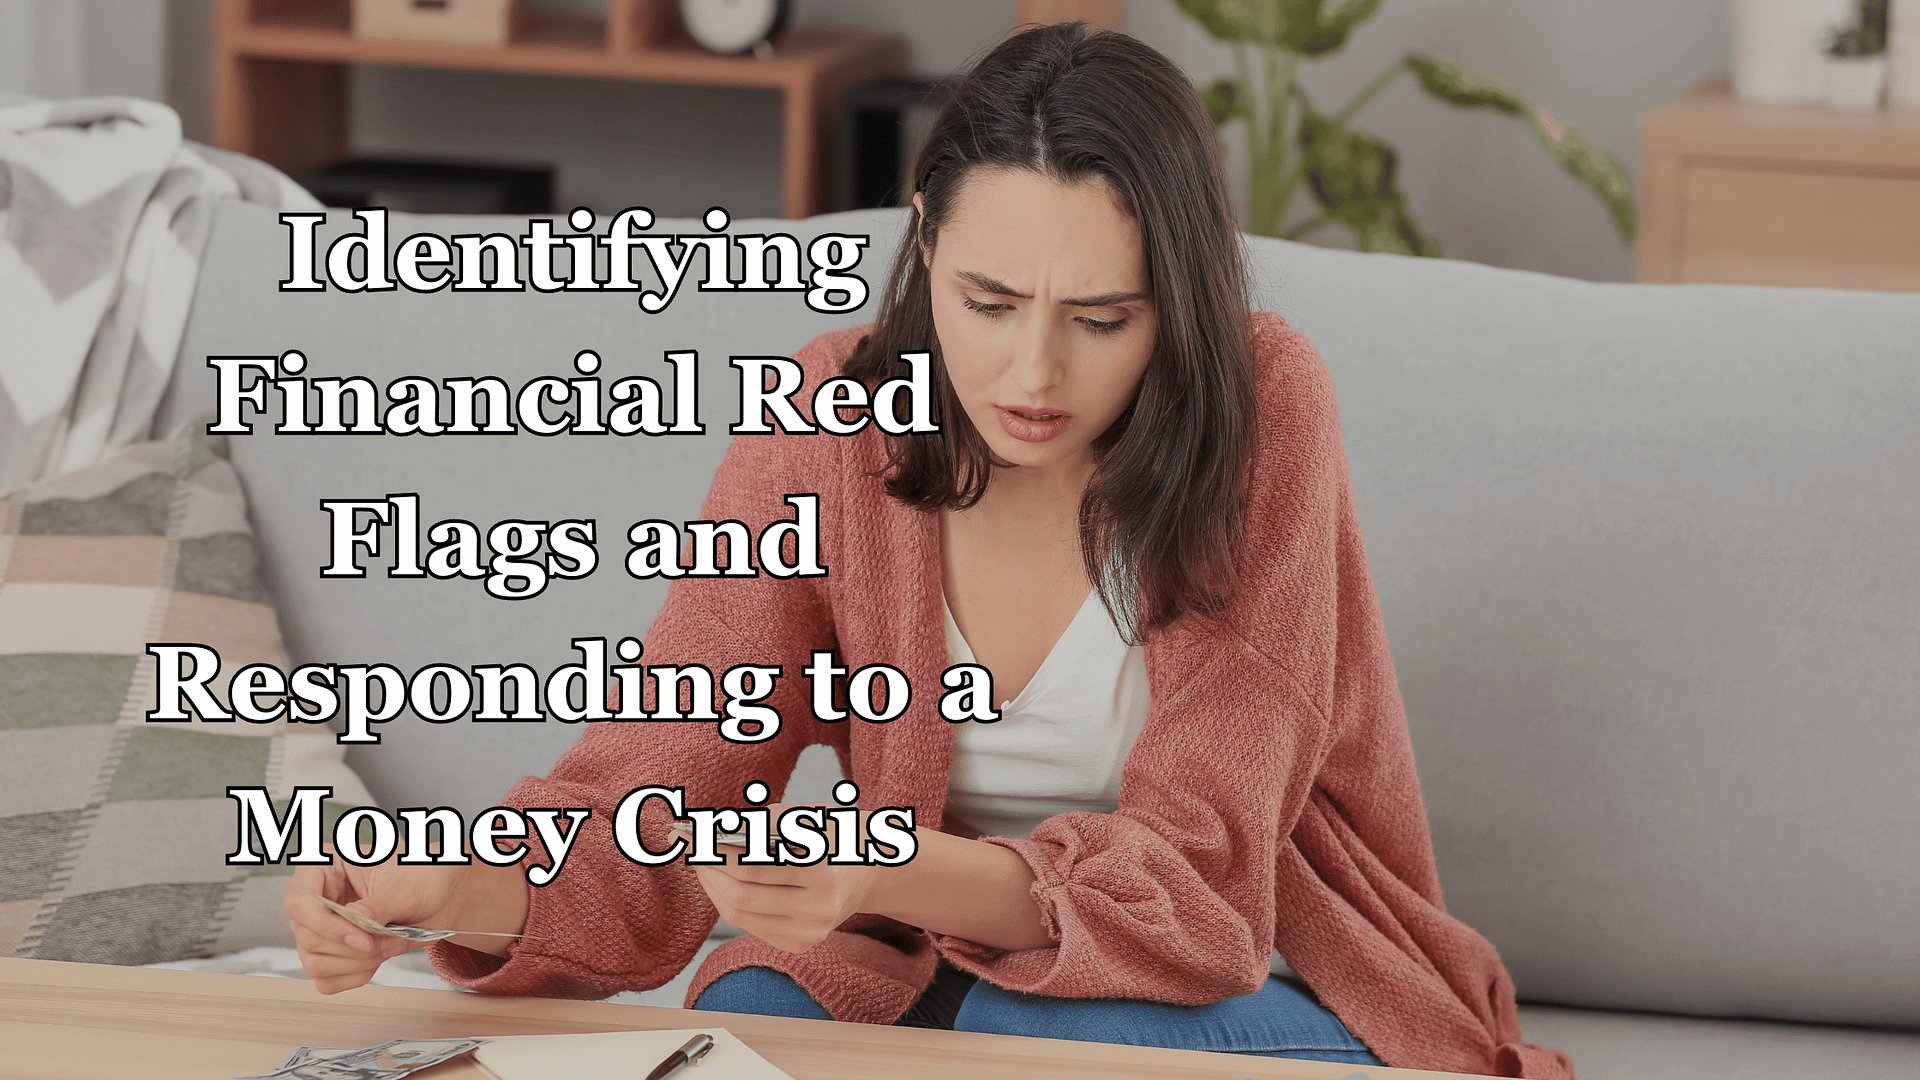 Identifying Financial Red Flags and Responding to a Money Crisis